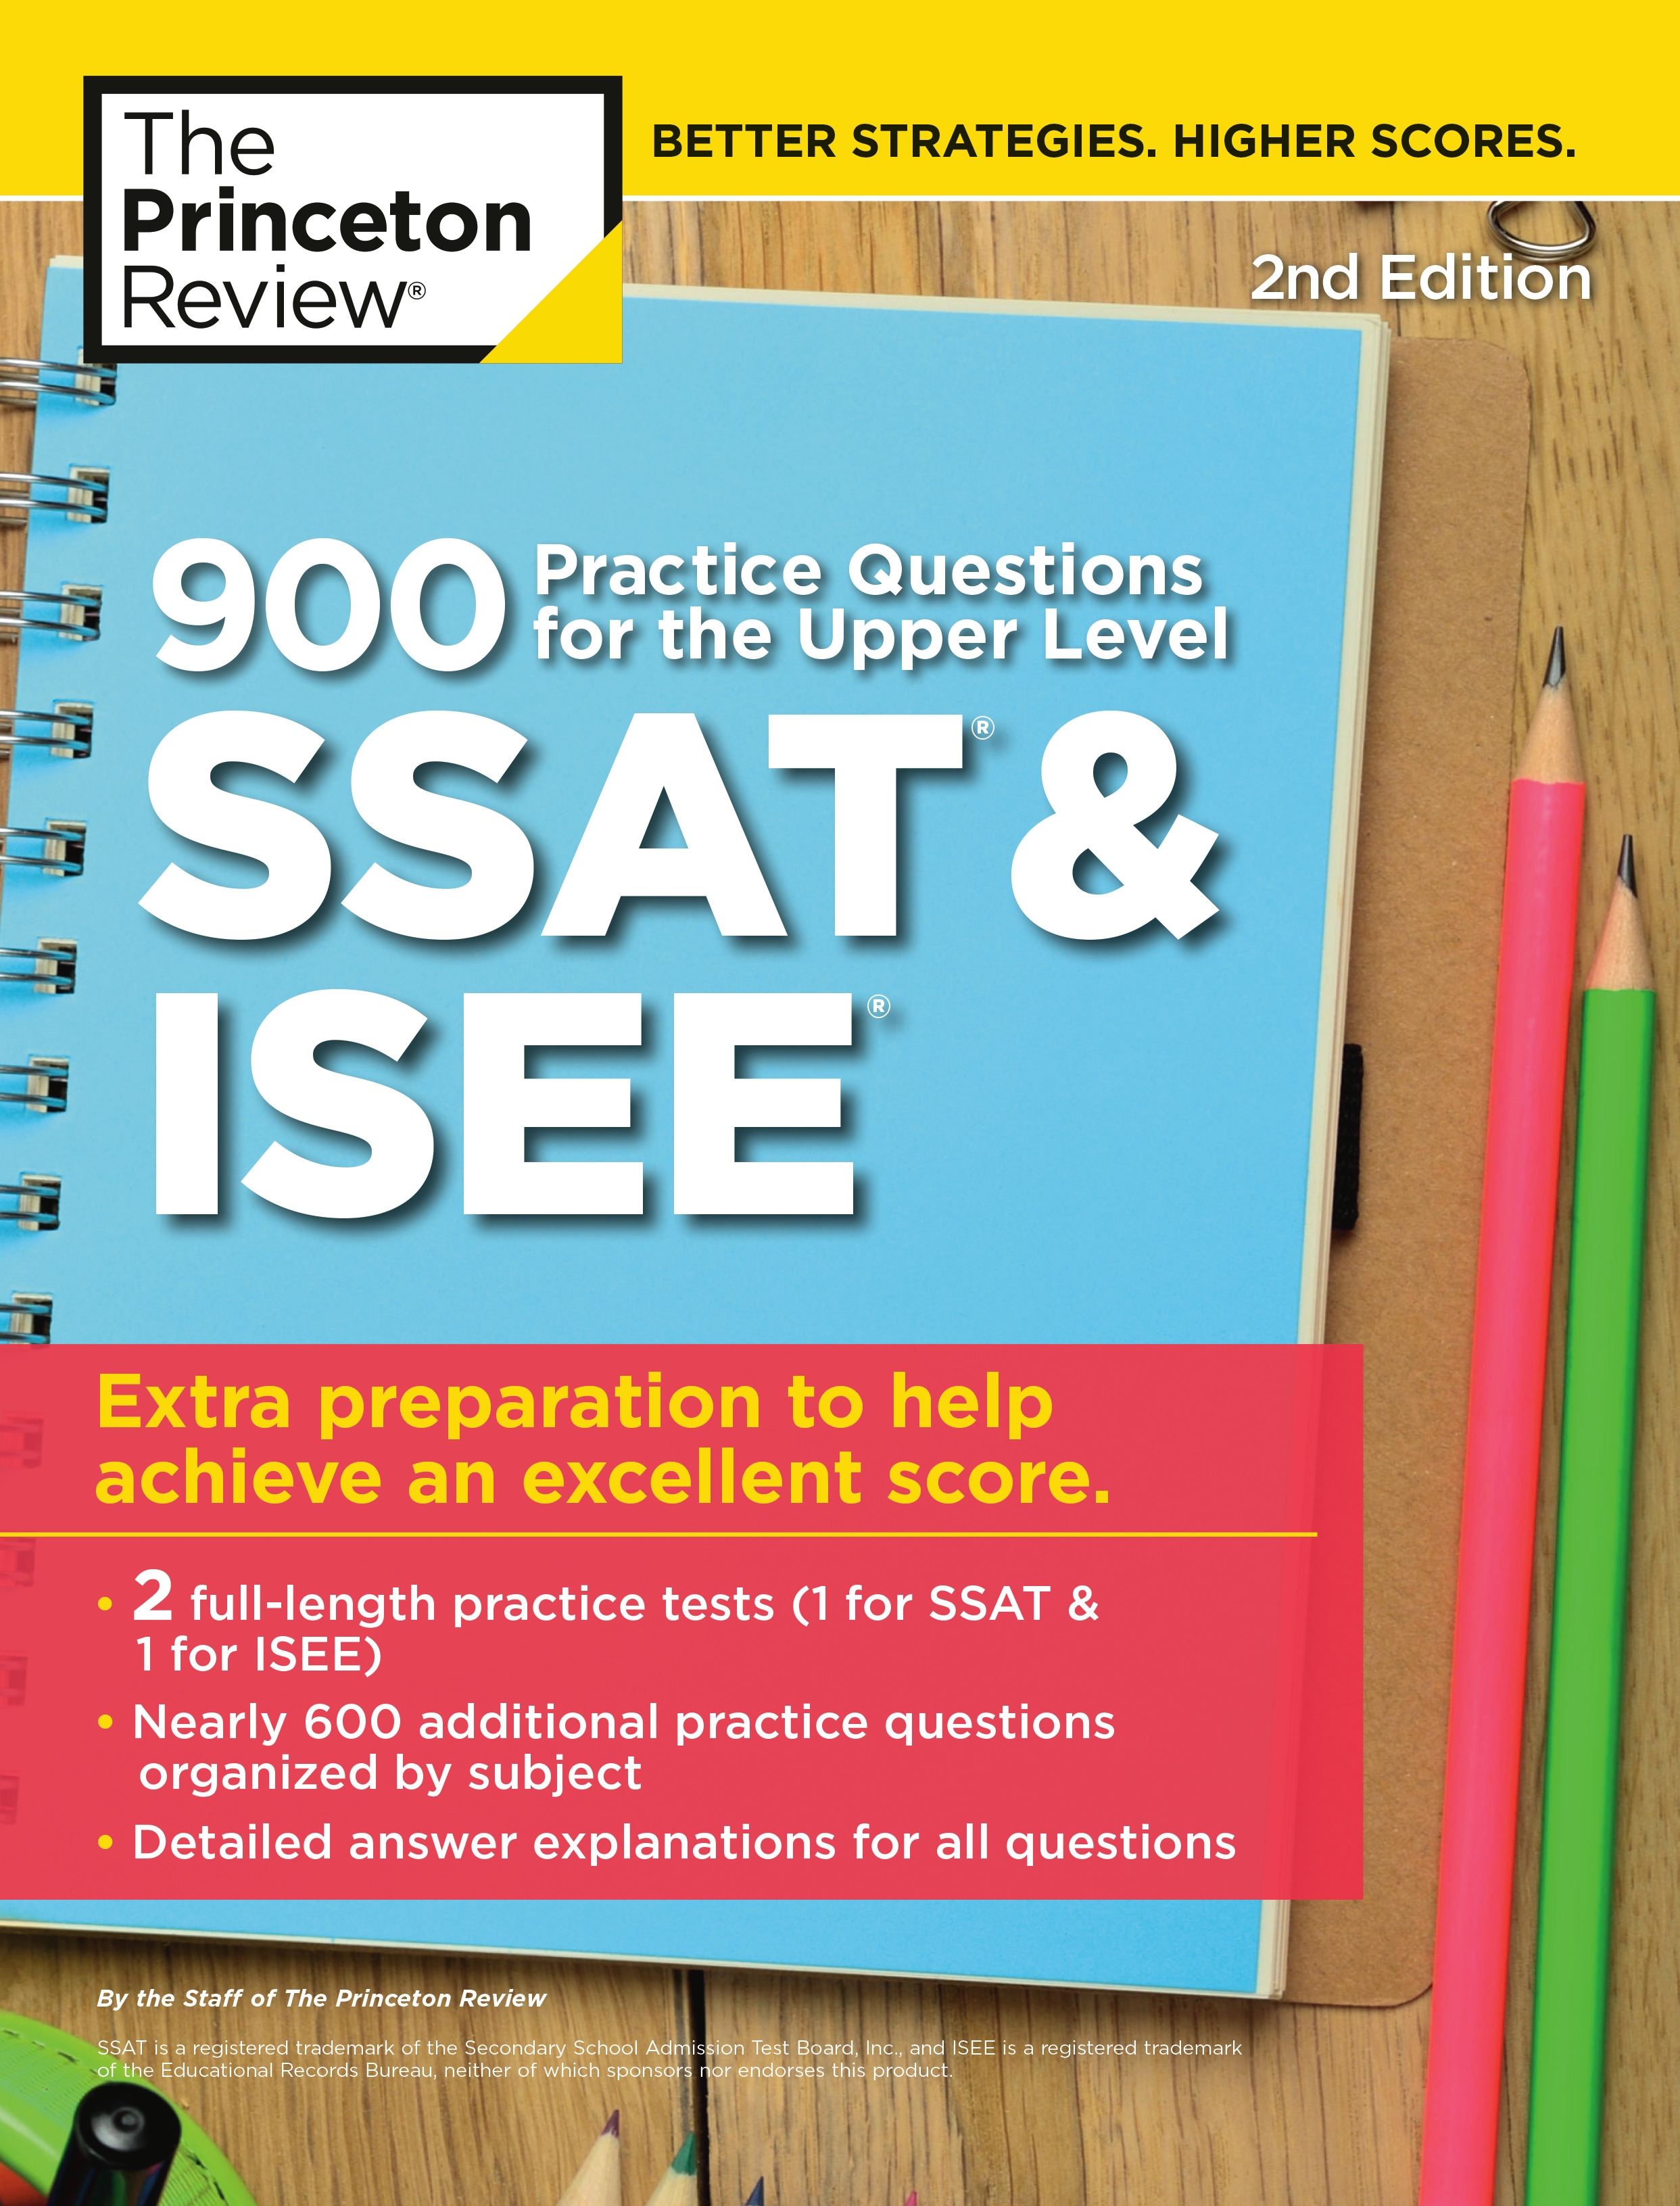 Private test. Princeton Practice Test. SSAT. SSAT Guide to the Test Upper Level. 10 Practice Tests for the sat, 2022: Extra Prep to help achieve an excellent score.